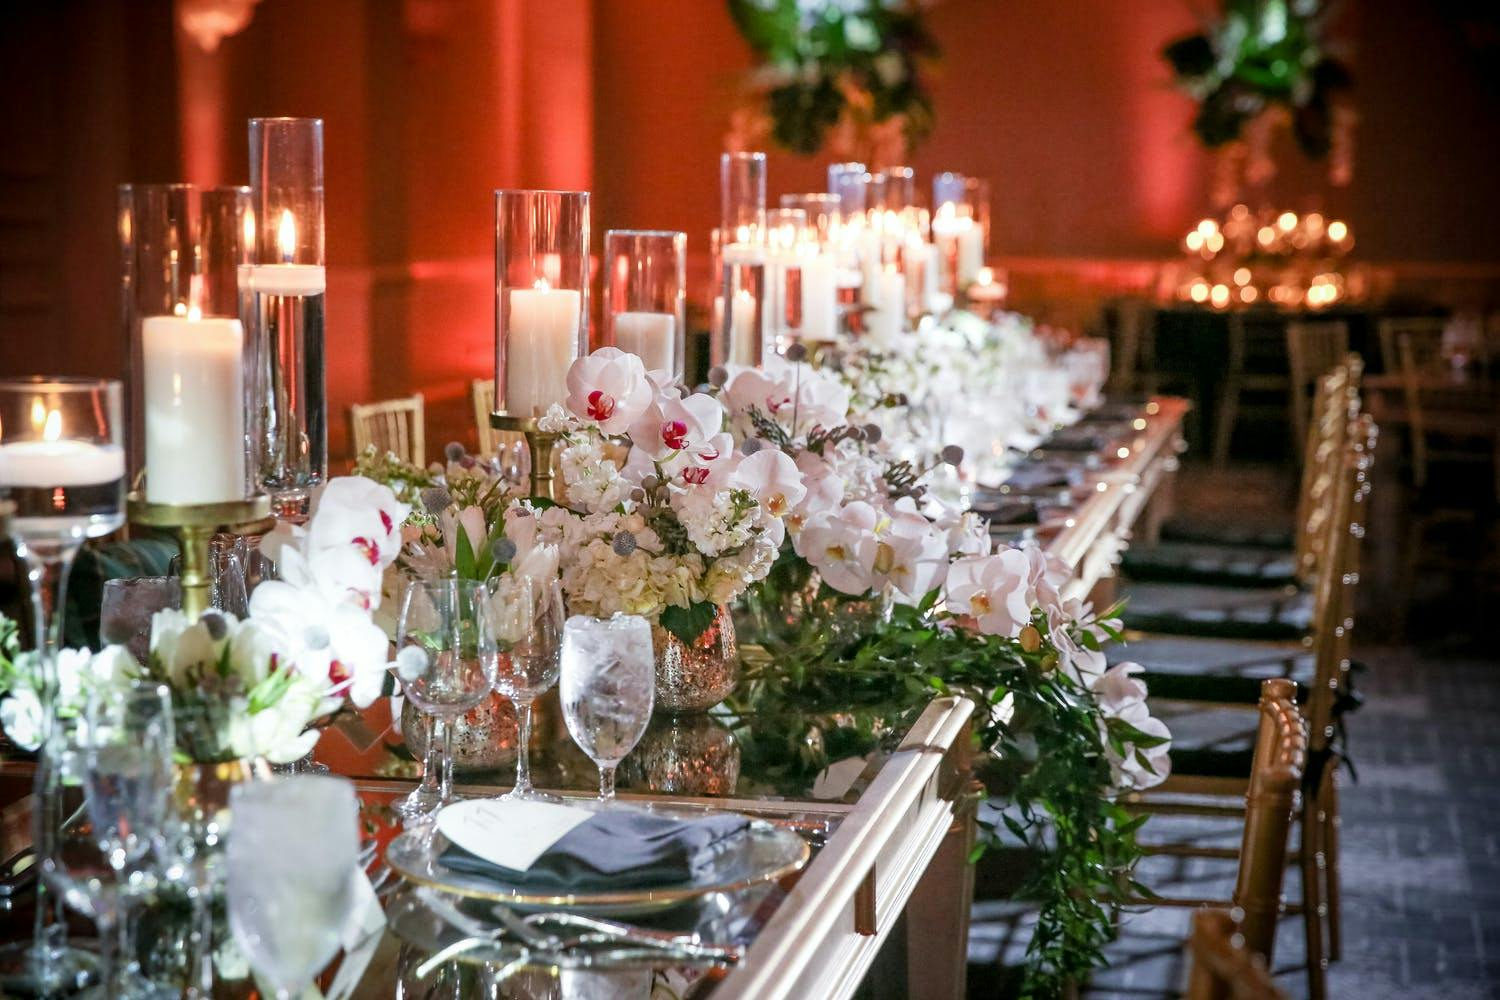 Cascading White Orchid Centerpiece and Twinkling Candlelight | PartySlate